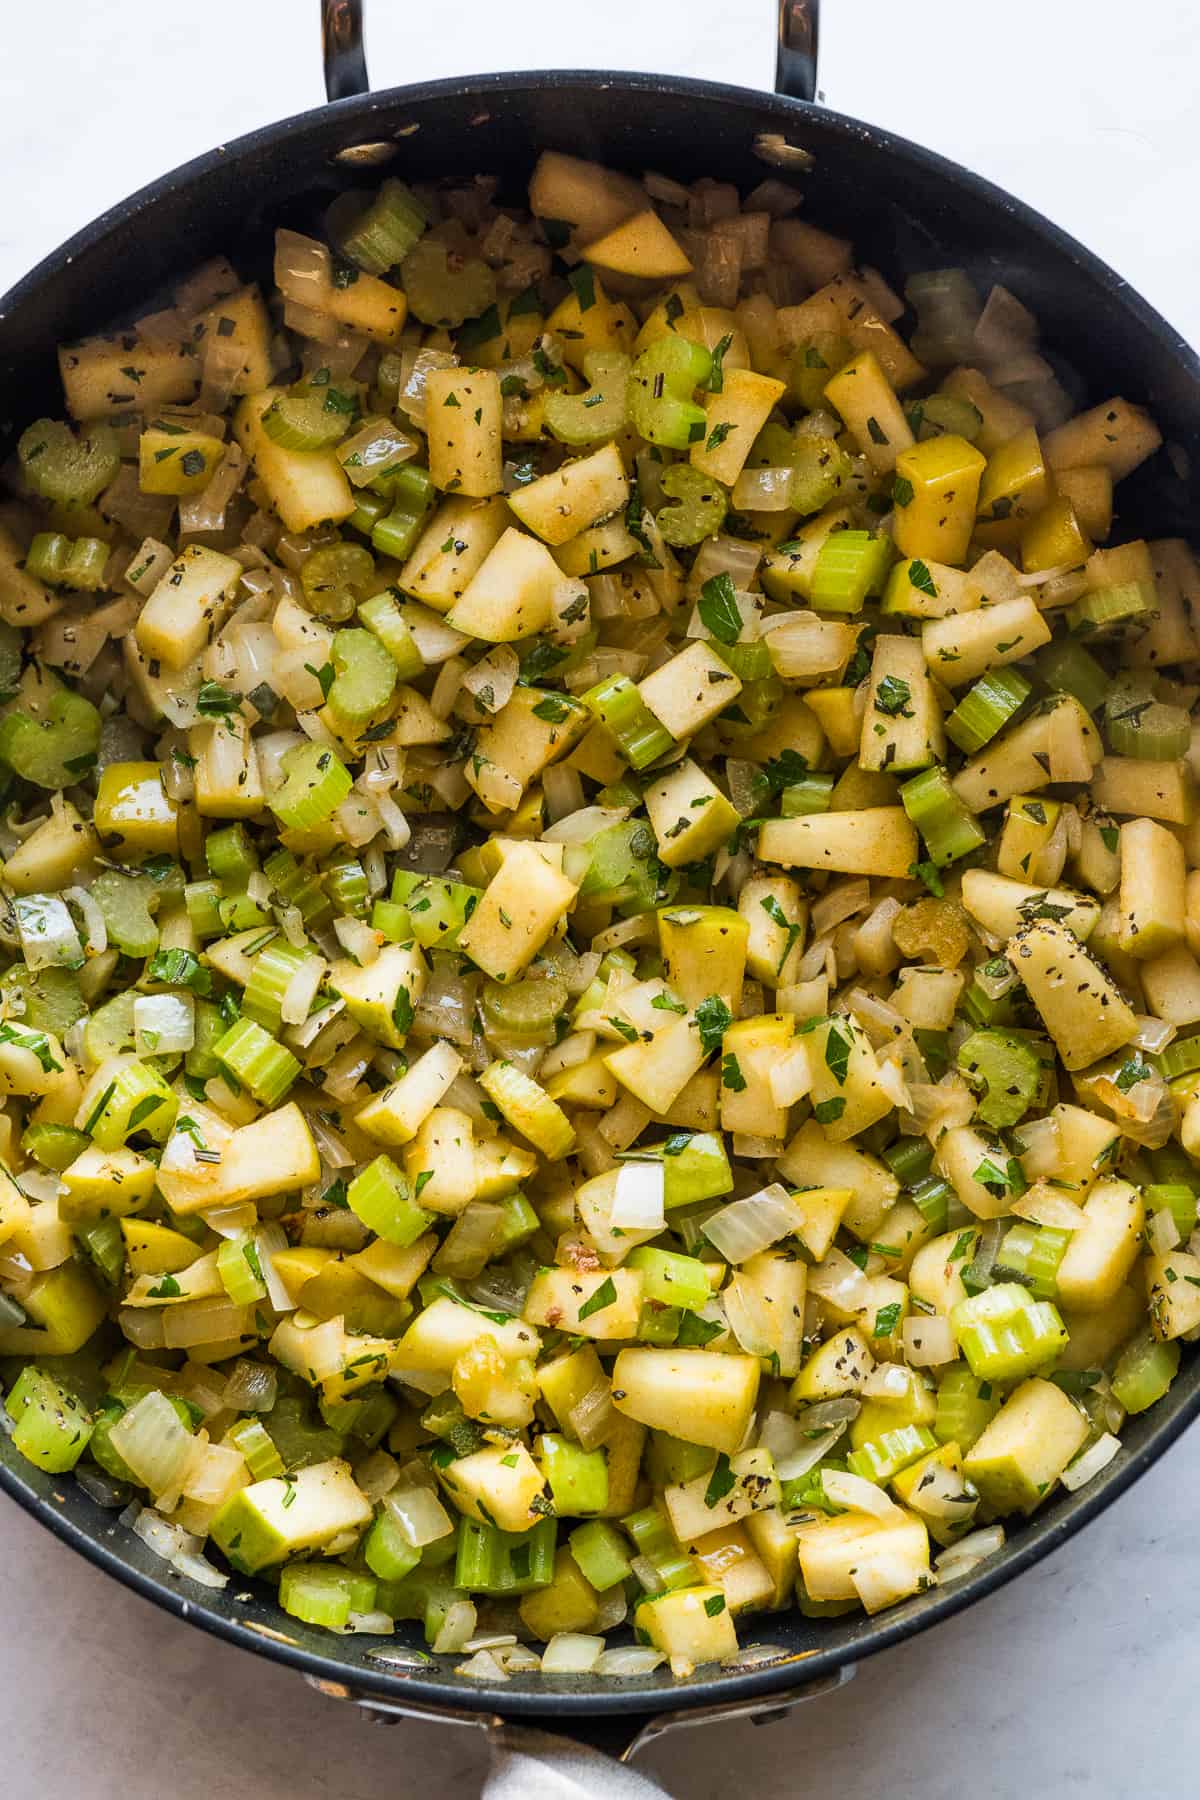 A skillet of cooked celery, onions and apples